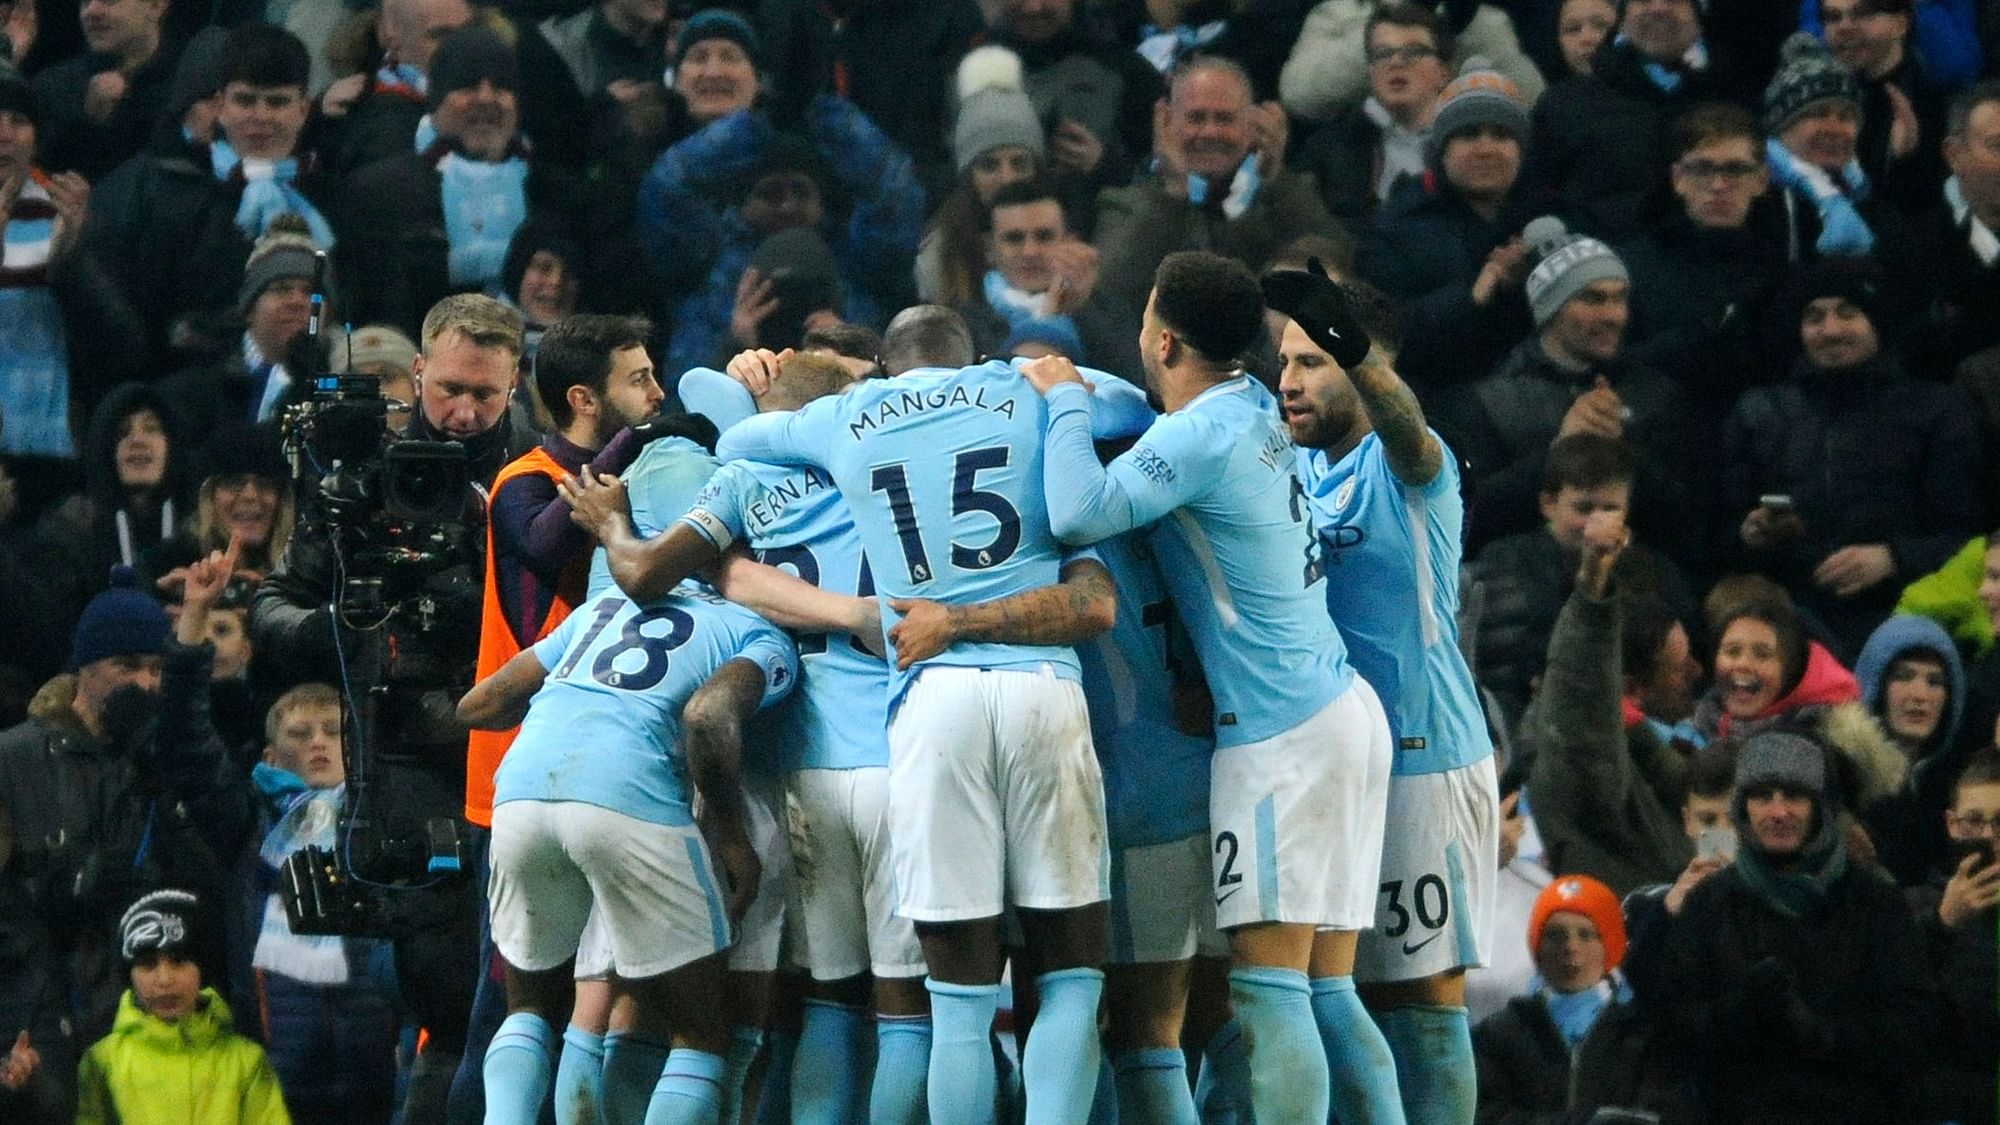 Explained: What can Manchester City do regarding UEFA’s 2 year ban from European competition?